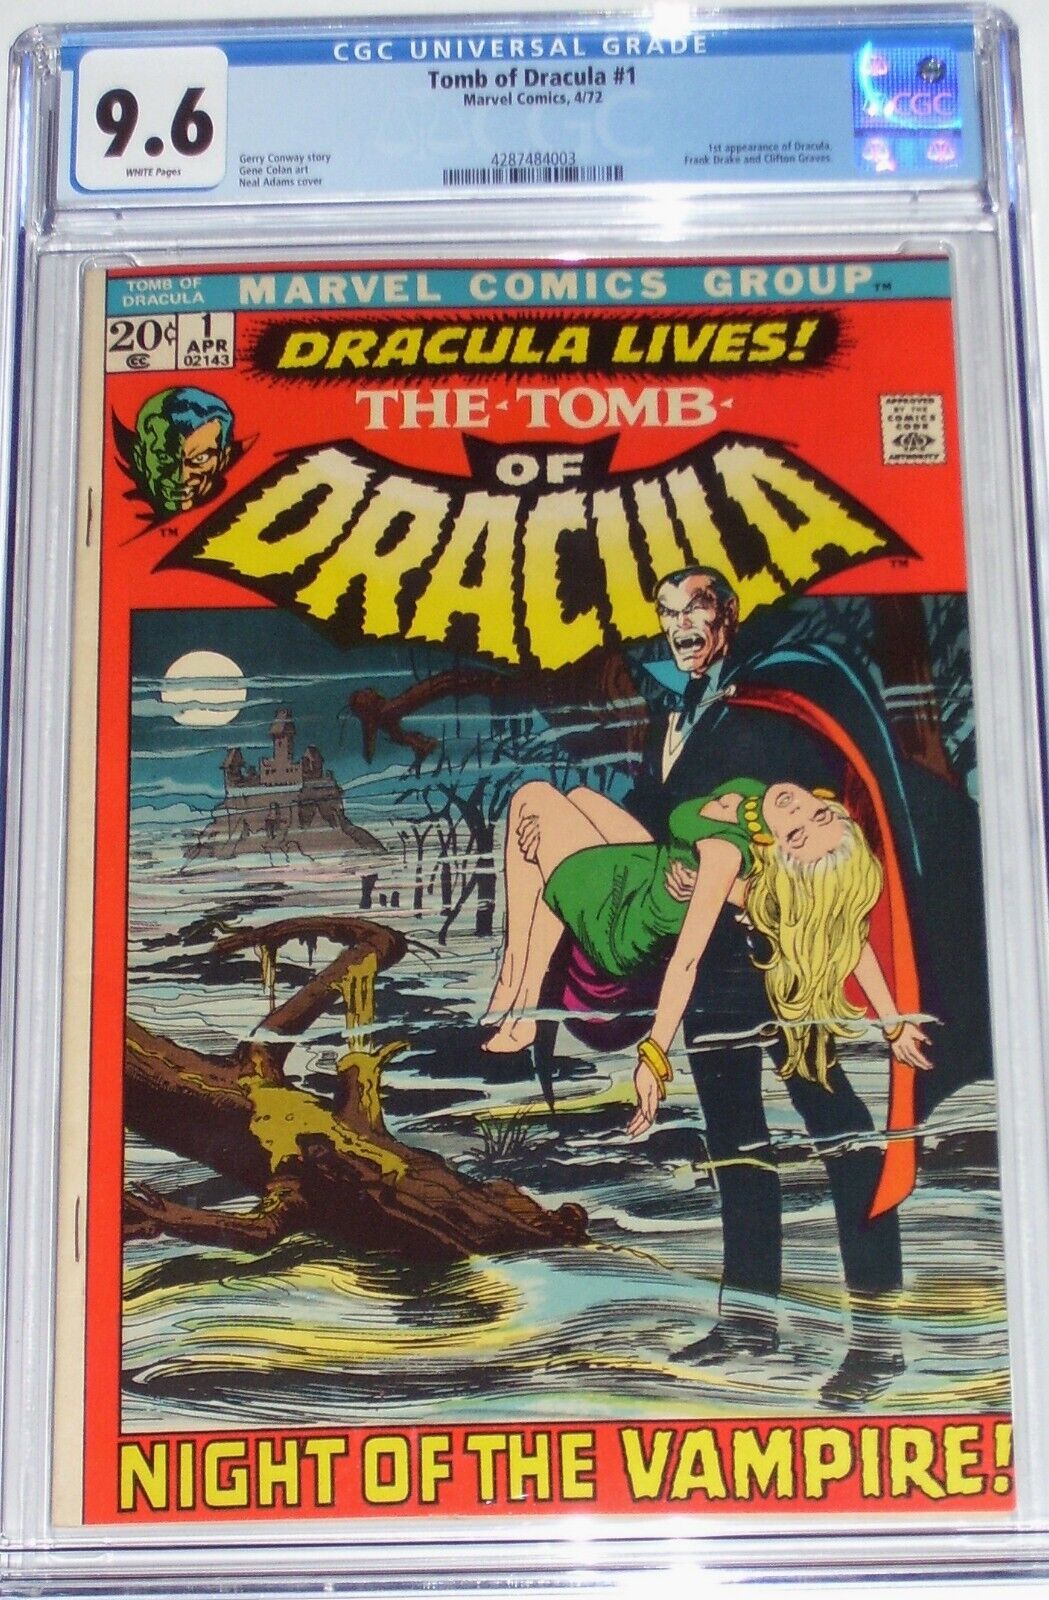 Tomb of Dracula #1 CGC 9.6 from April 1972 1st appearance of Dracula